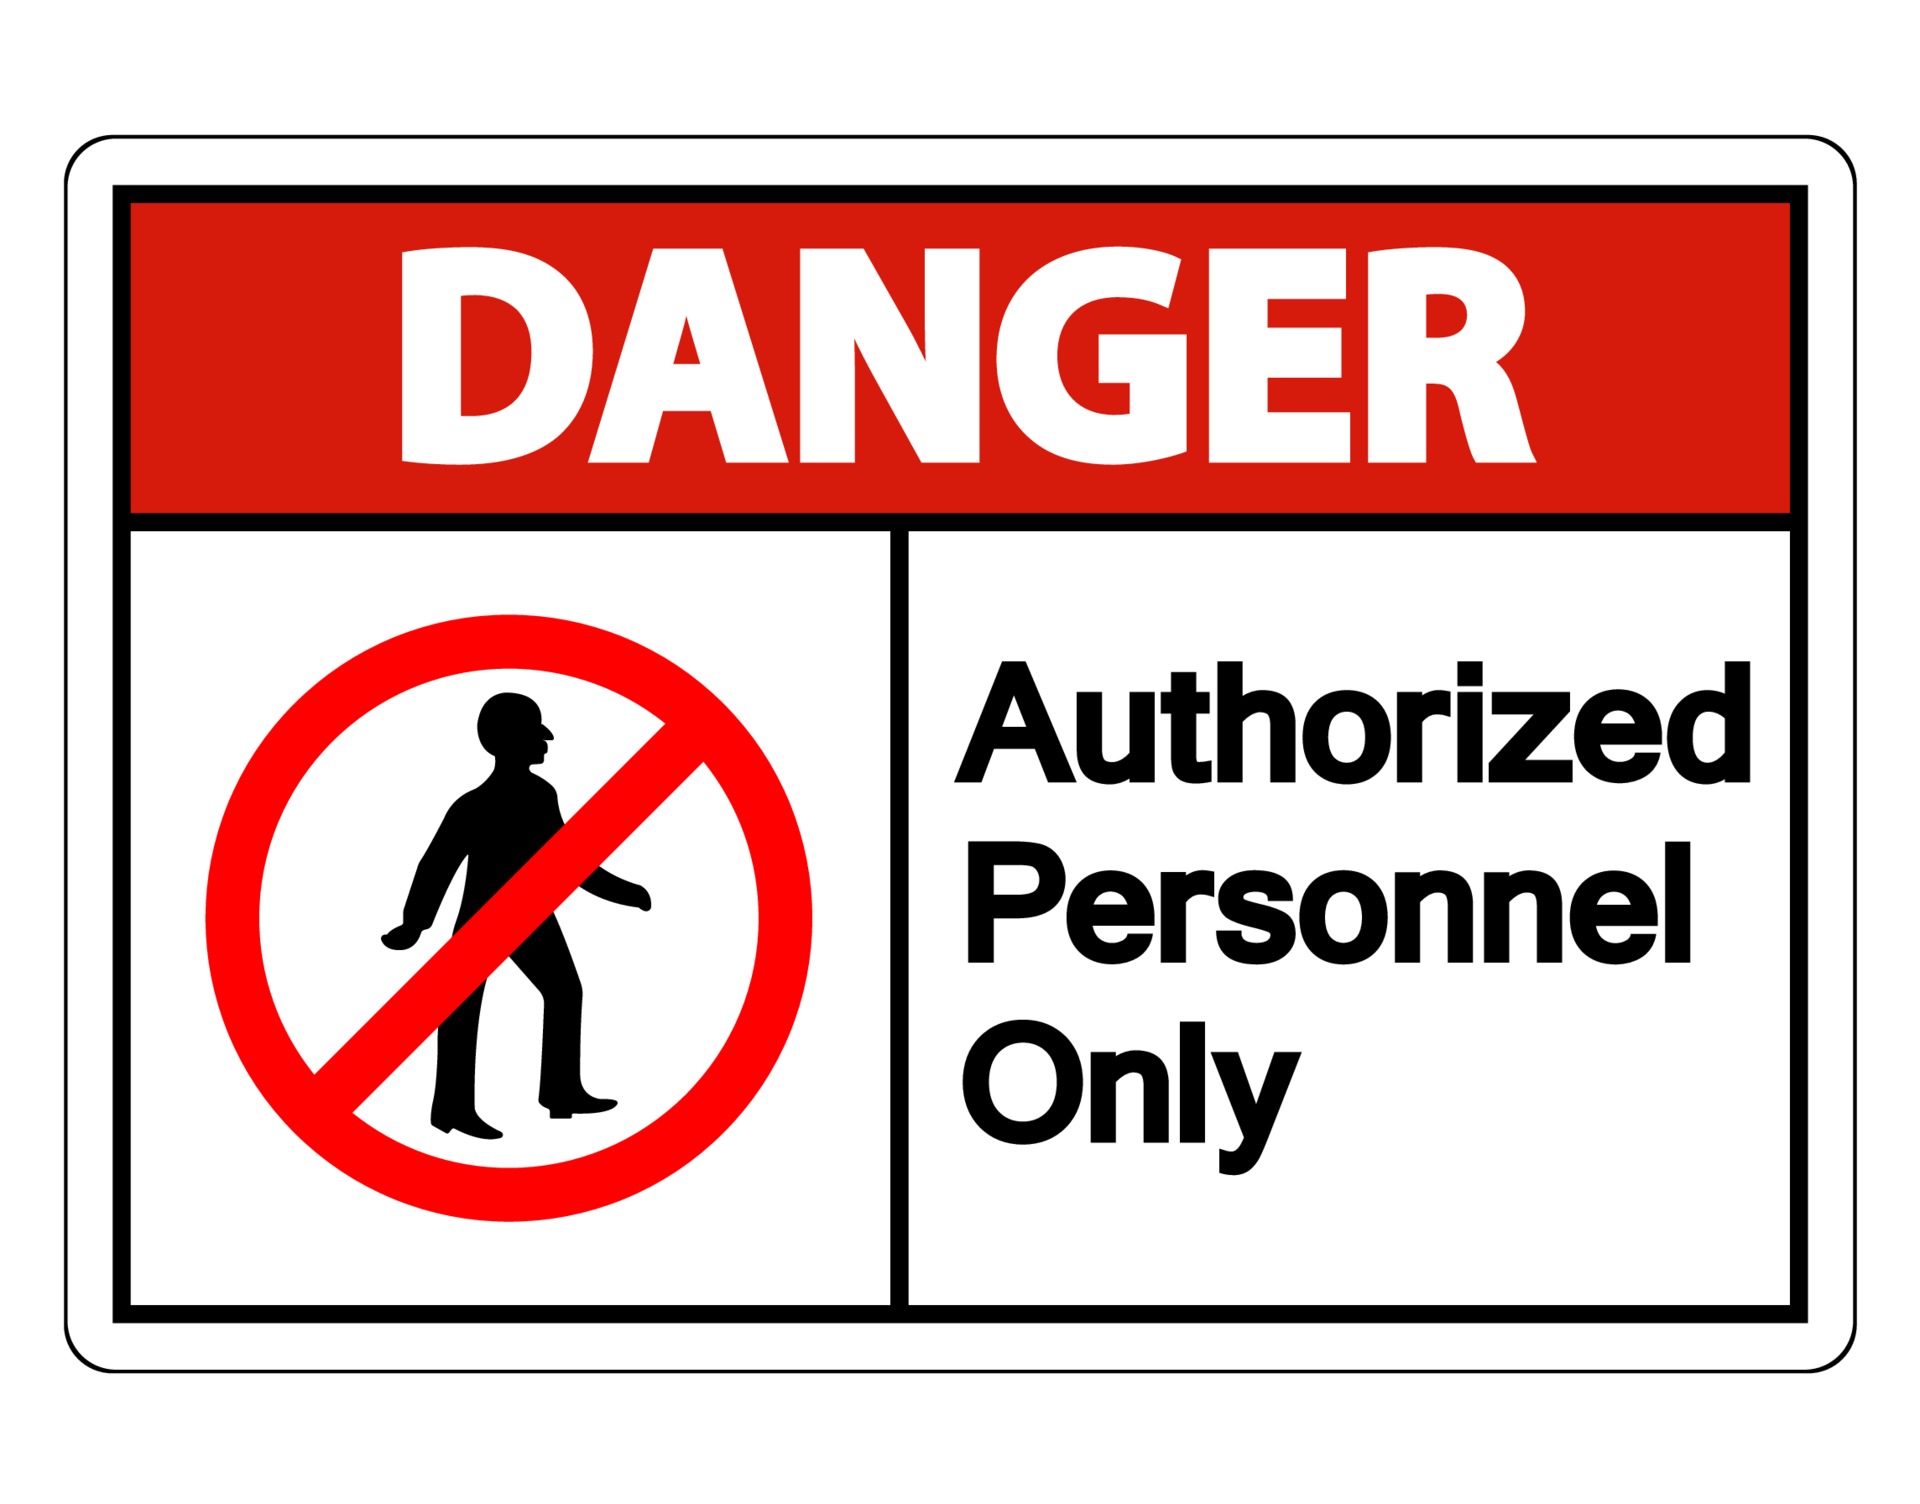 danger-authorized-personnel-only-symbol-sign-on-white-background